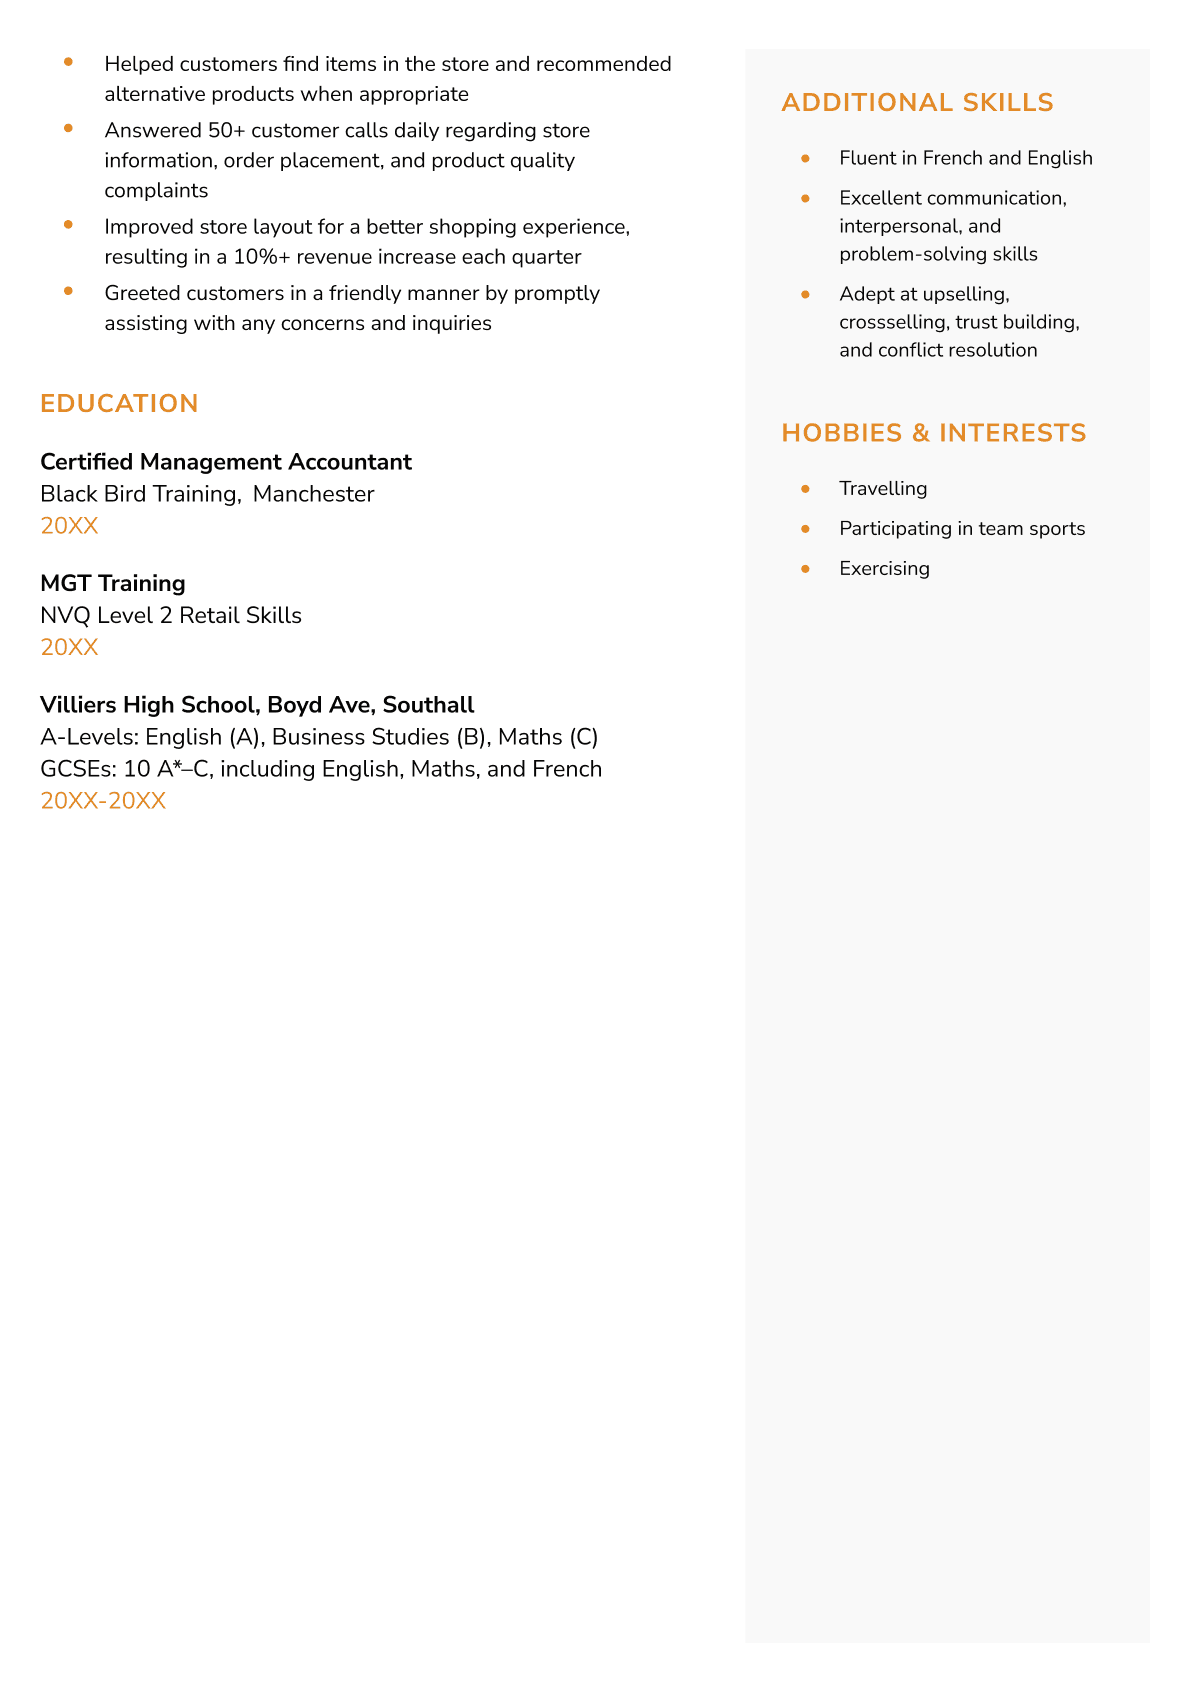 Page two of the orange Exeter CV template provides more space for work experience and skills, while allowing copious space for the candidate to specify their degree title, secondary school qualifications — such as A-Levels, Advanced Highers, GCSEs, N5s etc. — and their hobbies and interests.